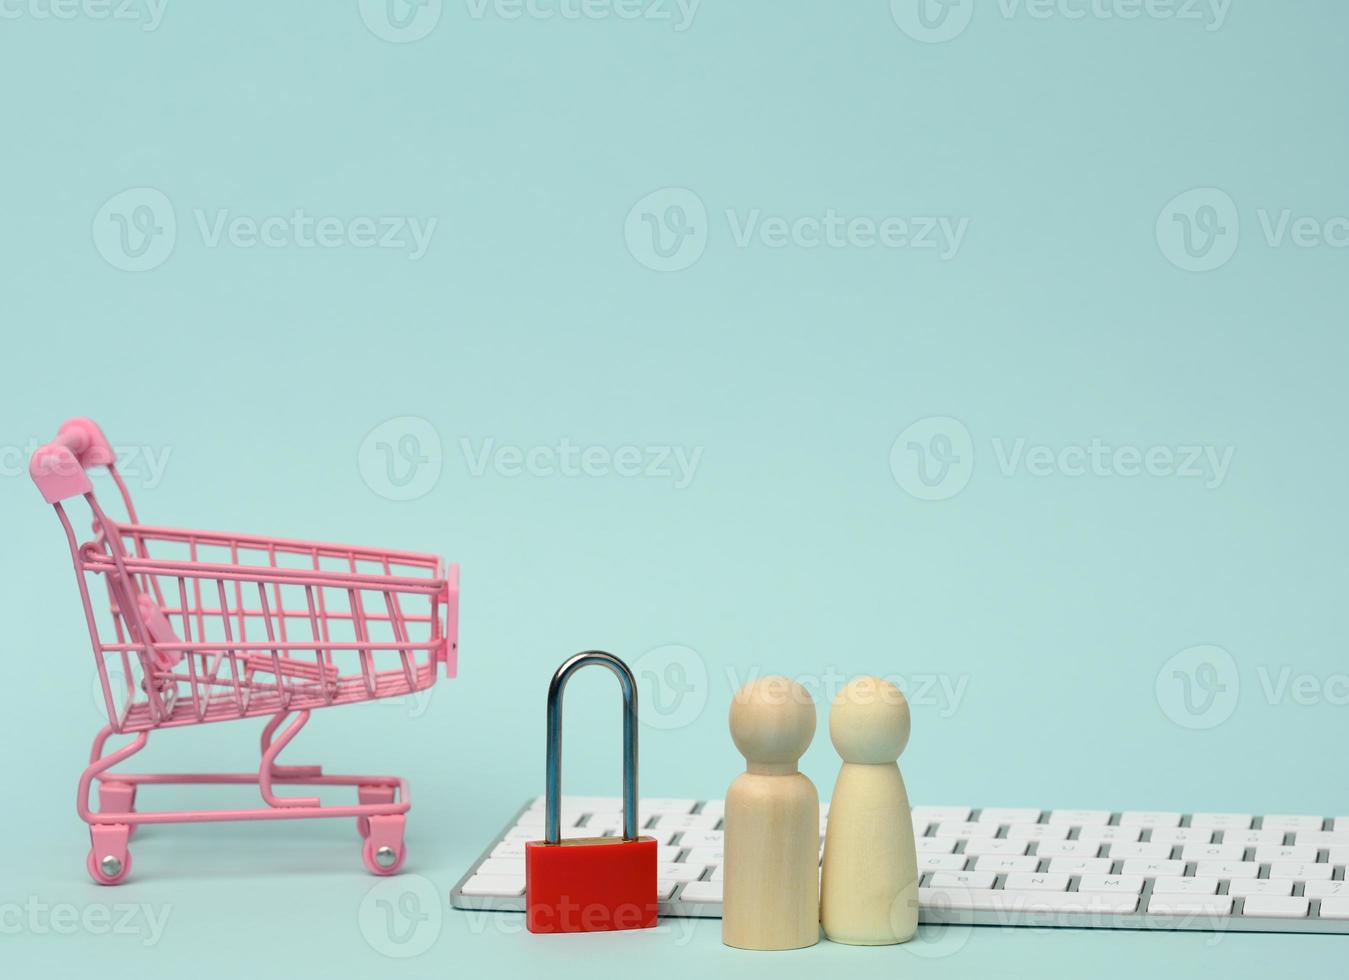 a red metal padlock stands on the keyboard and behind a miniature shopping cart, blue background photo